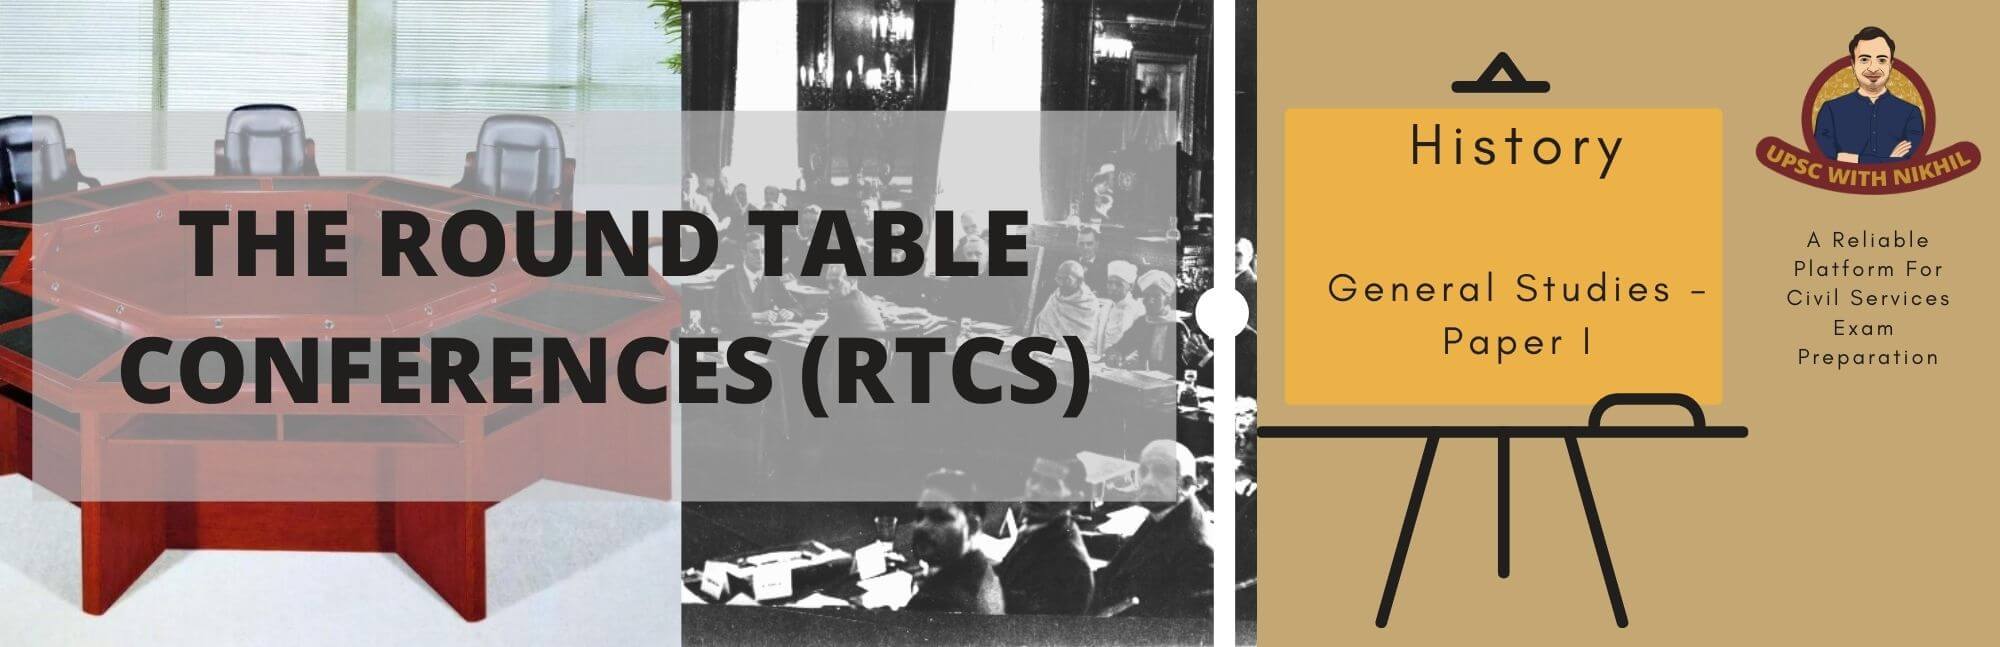 The Round Table Conferences Rtcs, Third Round Table Conference Byju S